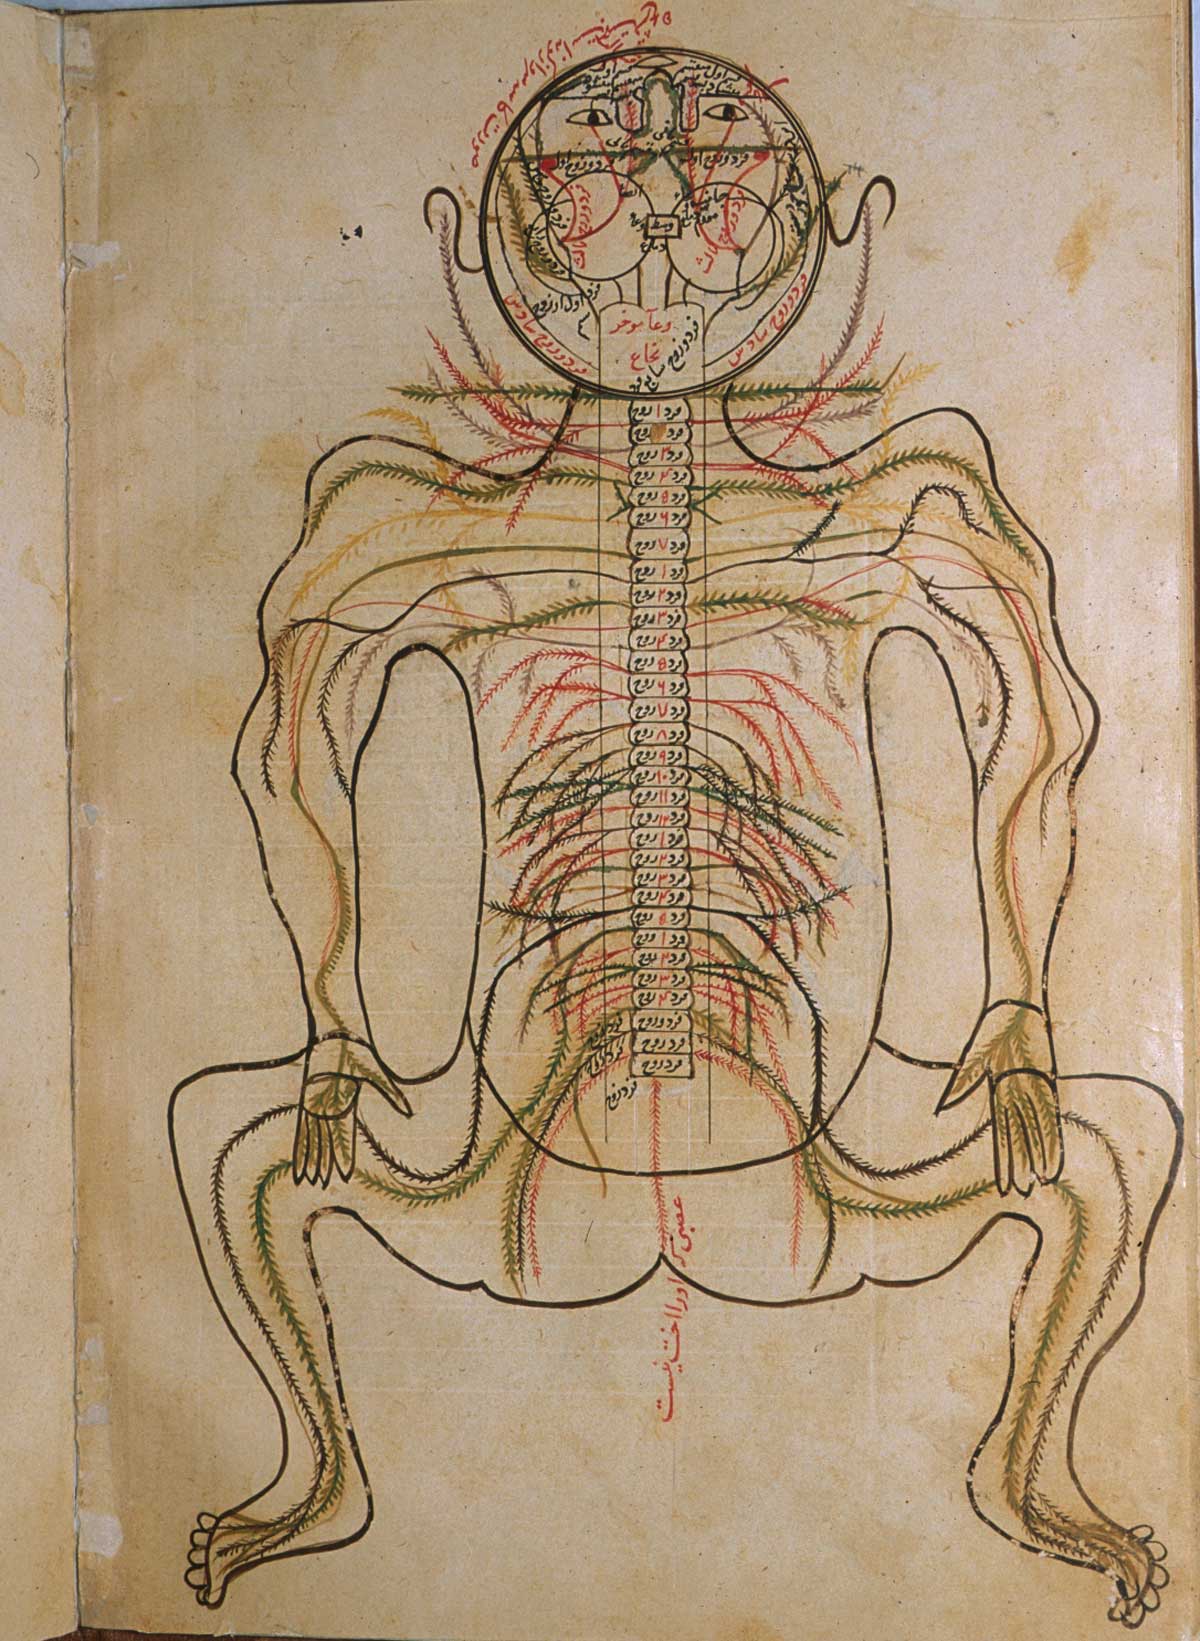 Folio 11b of Mansur ibn Ilyas' Tashrih-i badan-i insan, featuring the nervous system, also viewed from the back with the head hyperextended. The pairs of nerves are indicated by inks of contrasting colours.